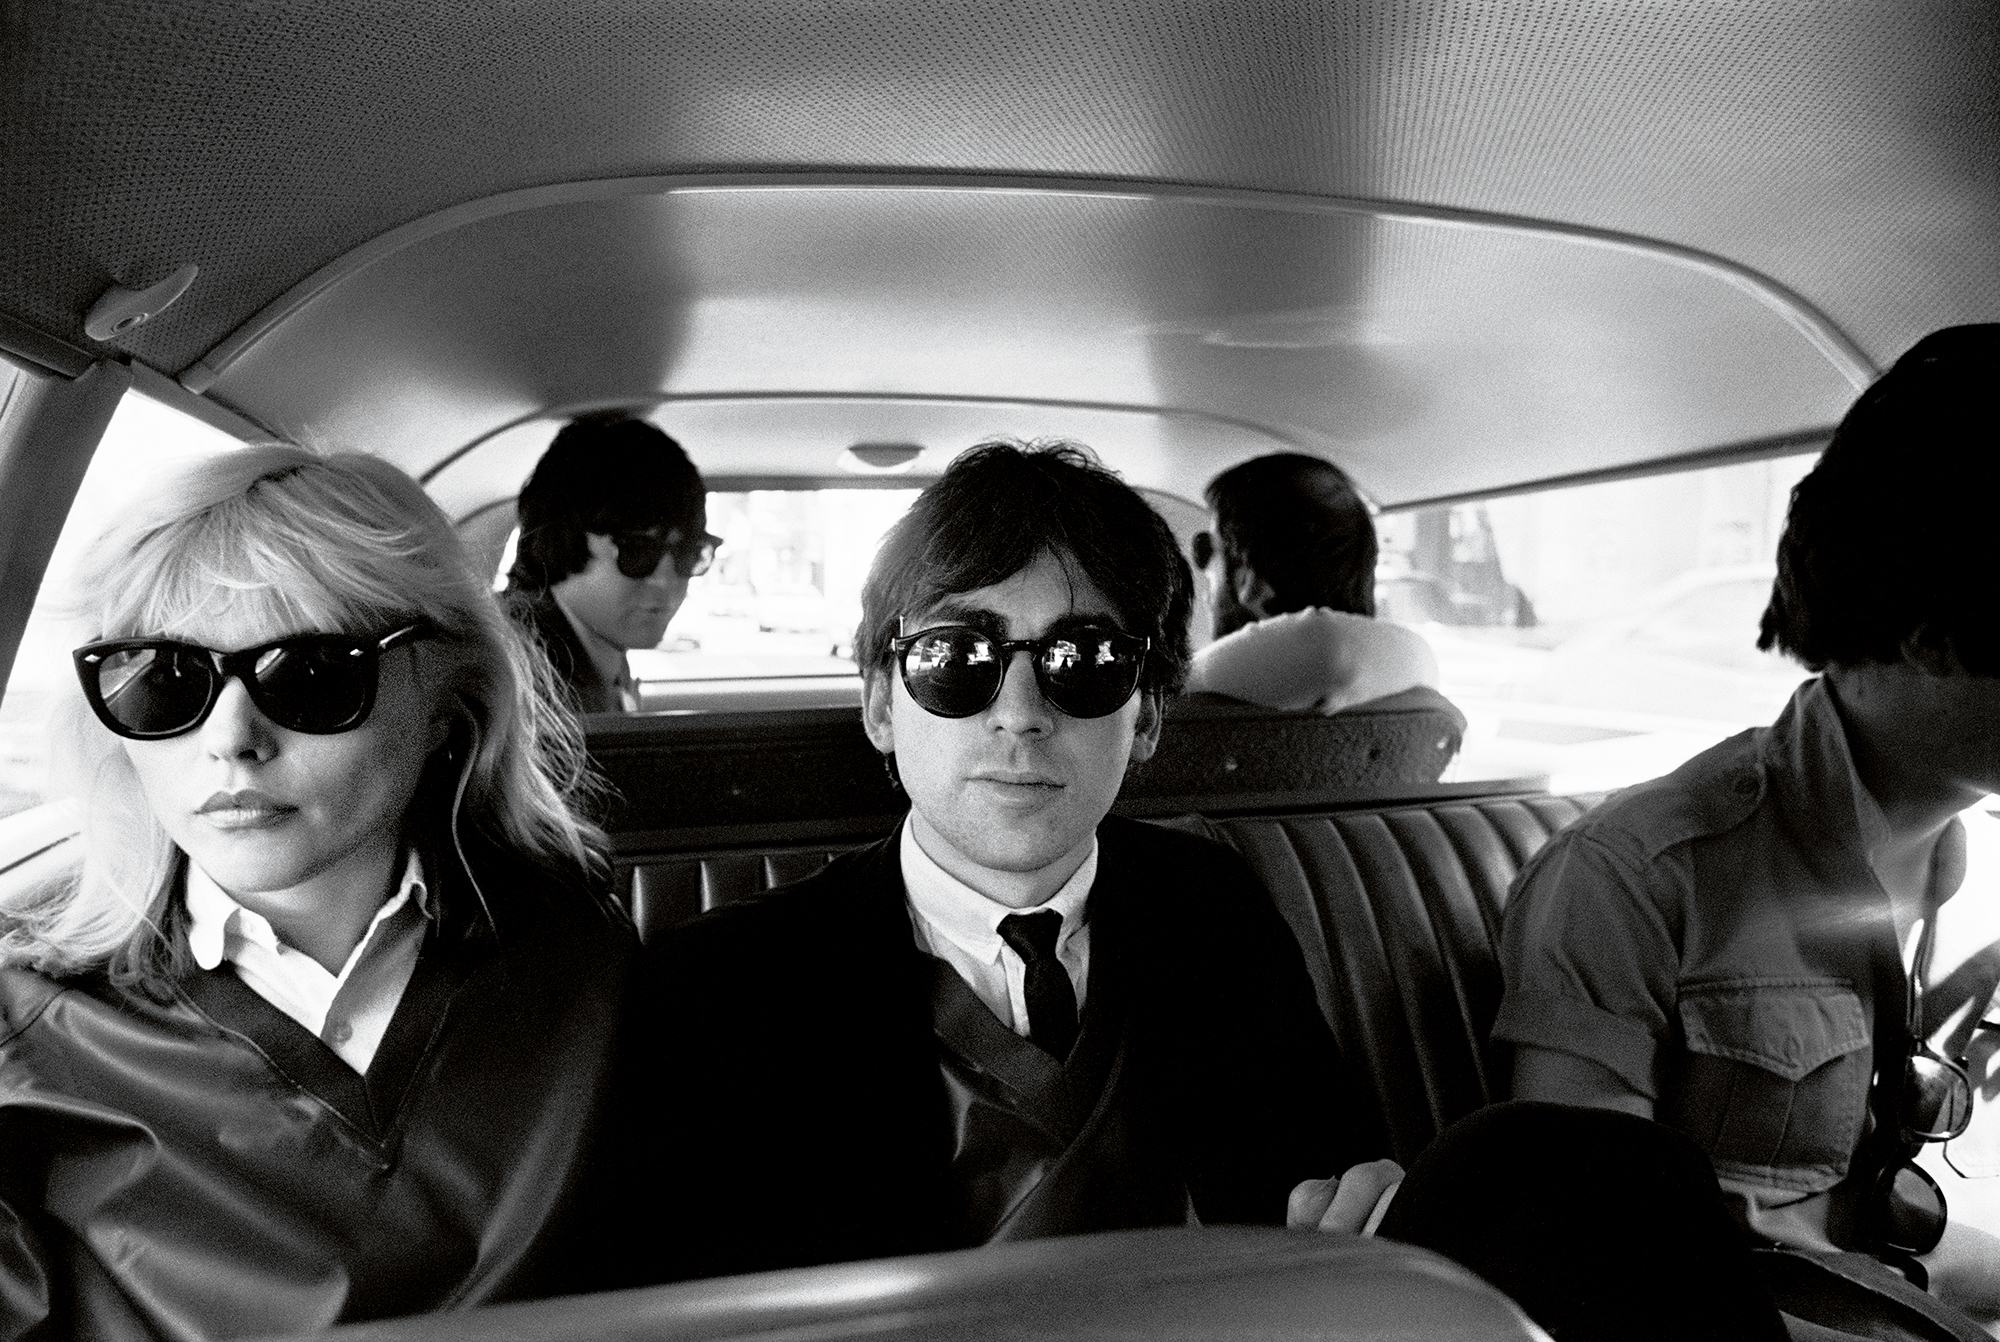 Blondie en route to Golden Gate Park’s Conservatory of Flowers in San Francisco, 1977.